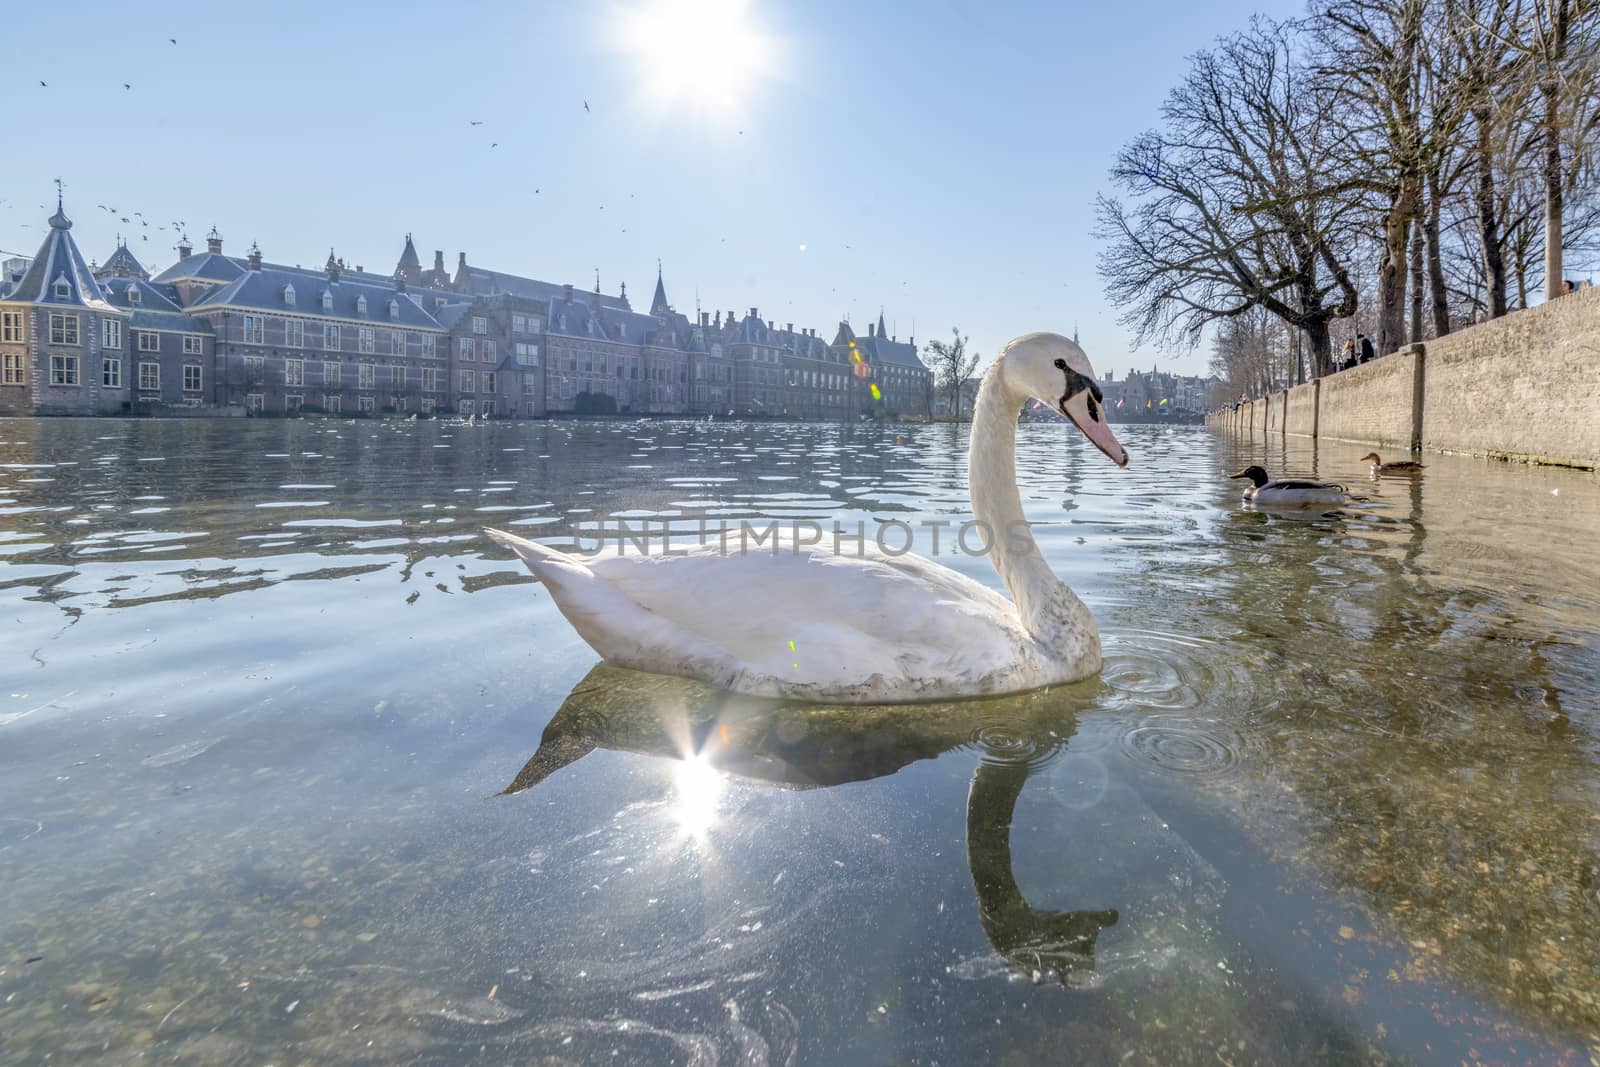 White swan swimming on the pond of Hofvijver, the Dutch parliament building and under a bright and warm late winter sun light, The Hague, Netherlands